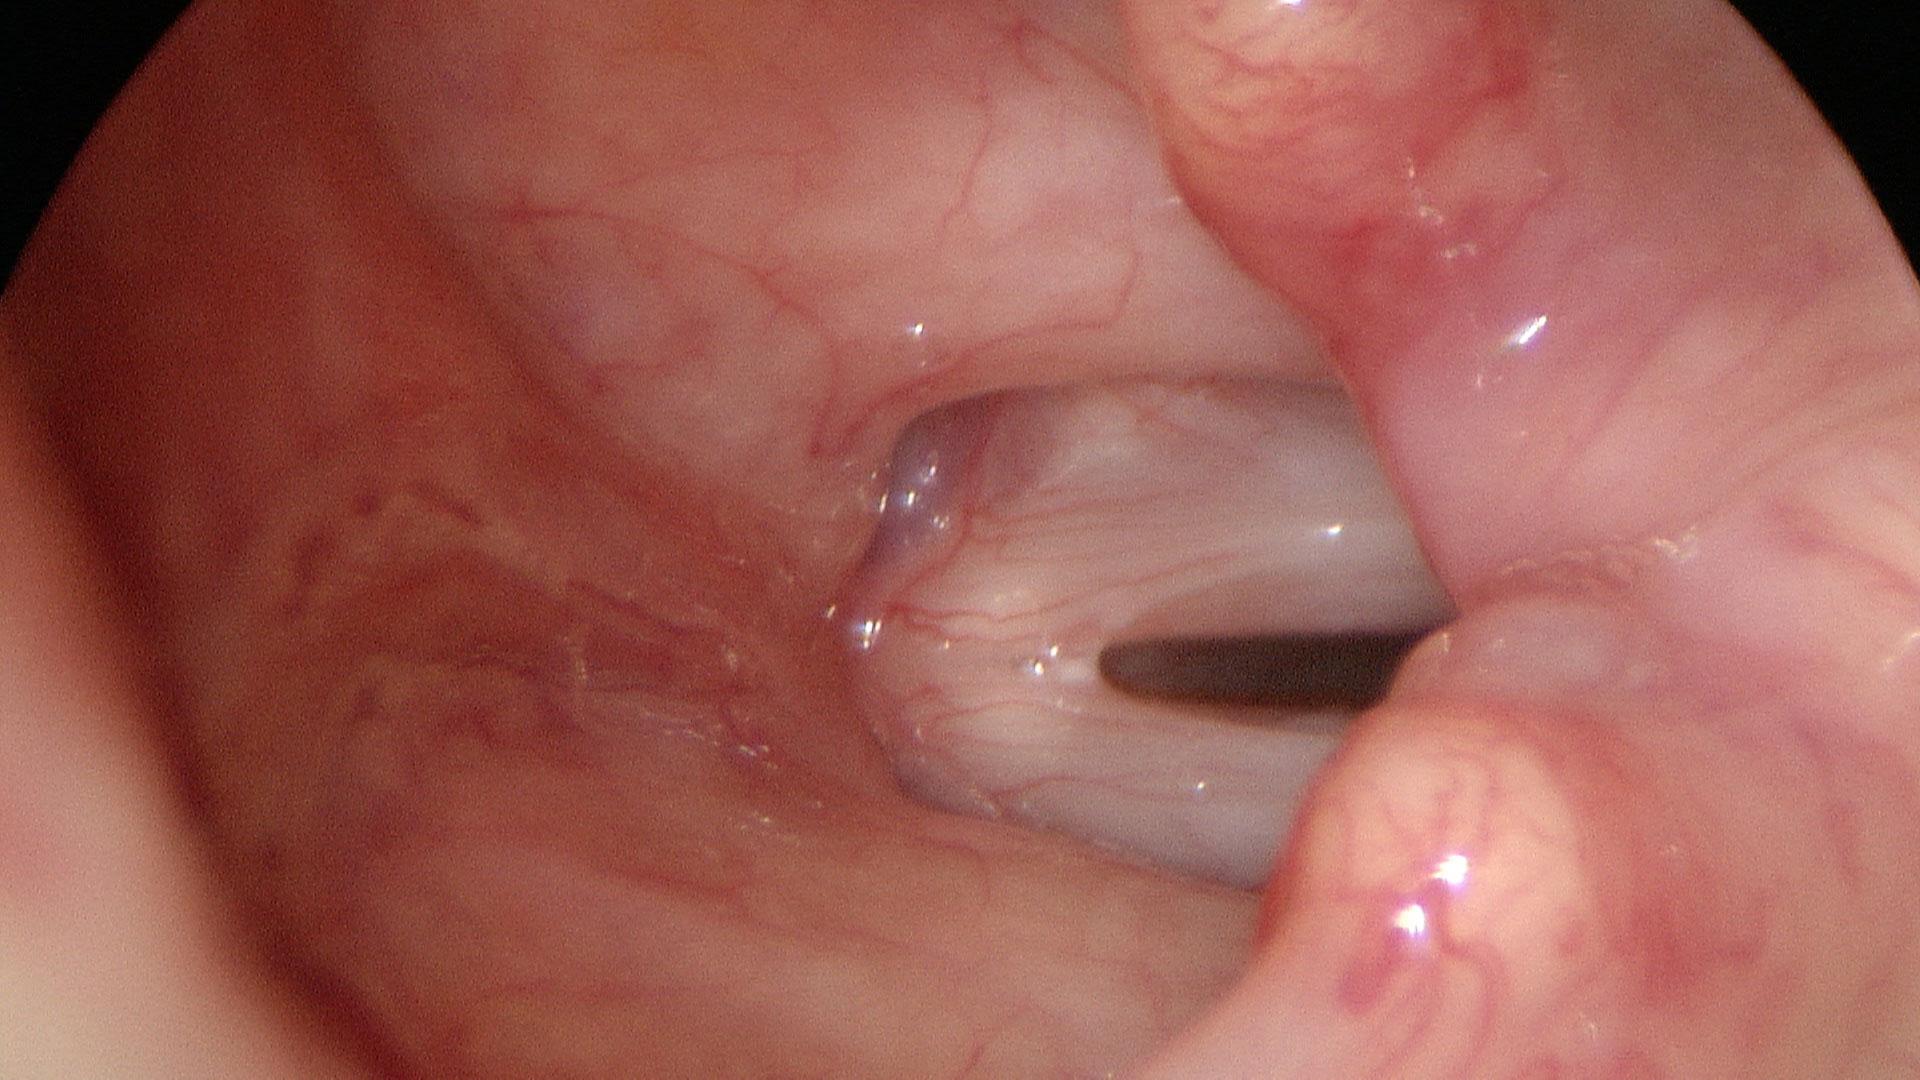 Vocal cord margins when viewed at low pitch, lesions are hidden